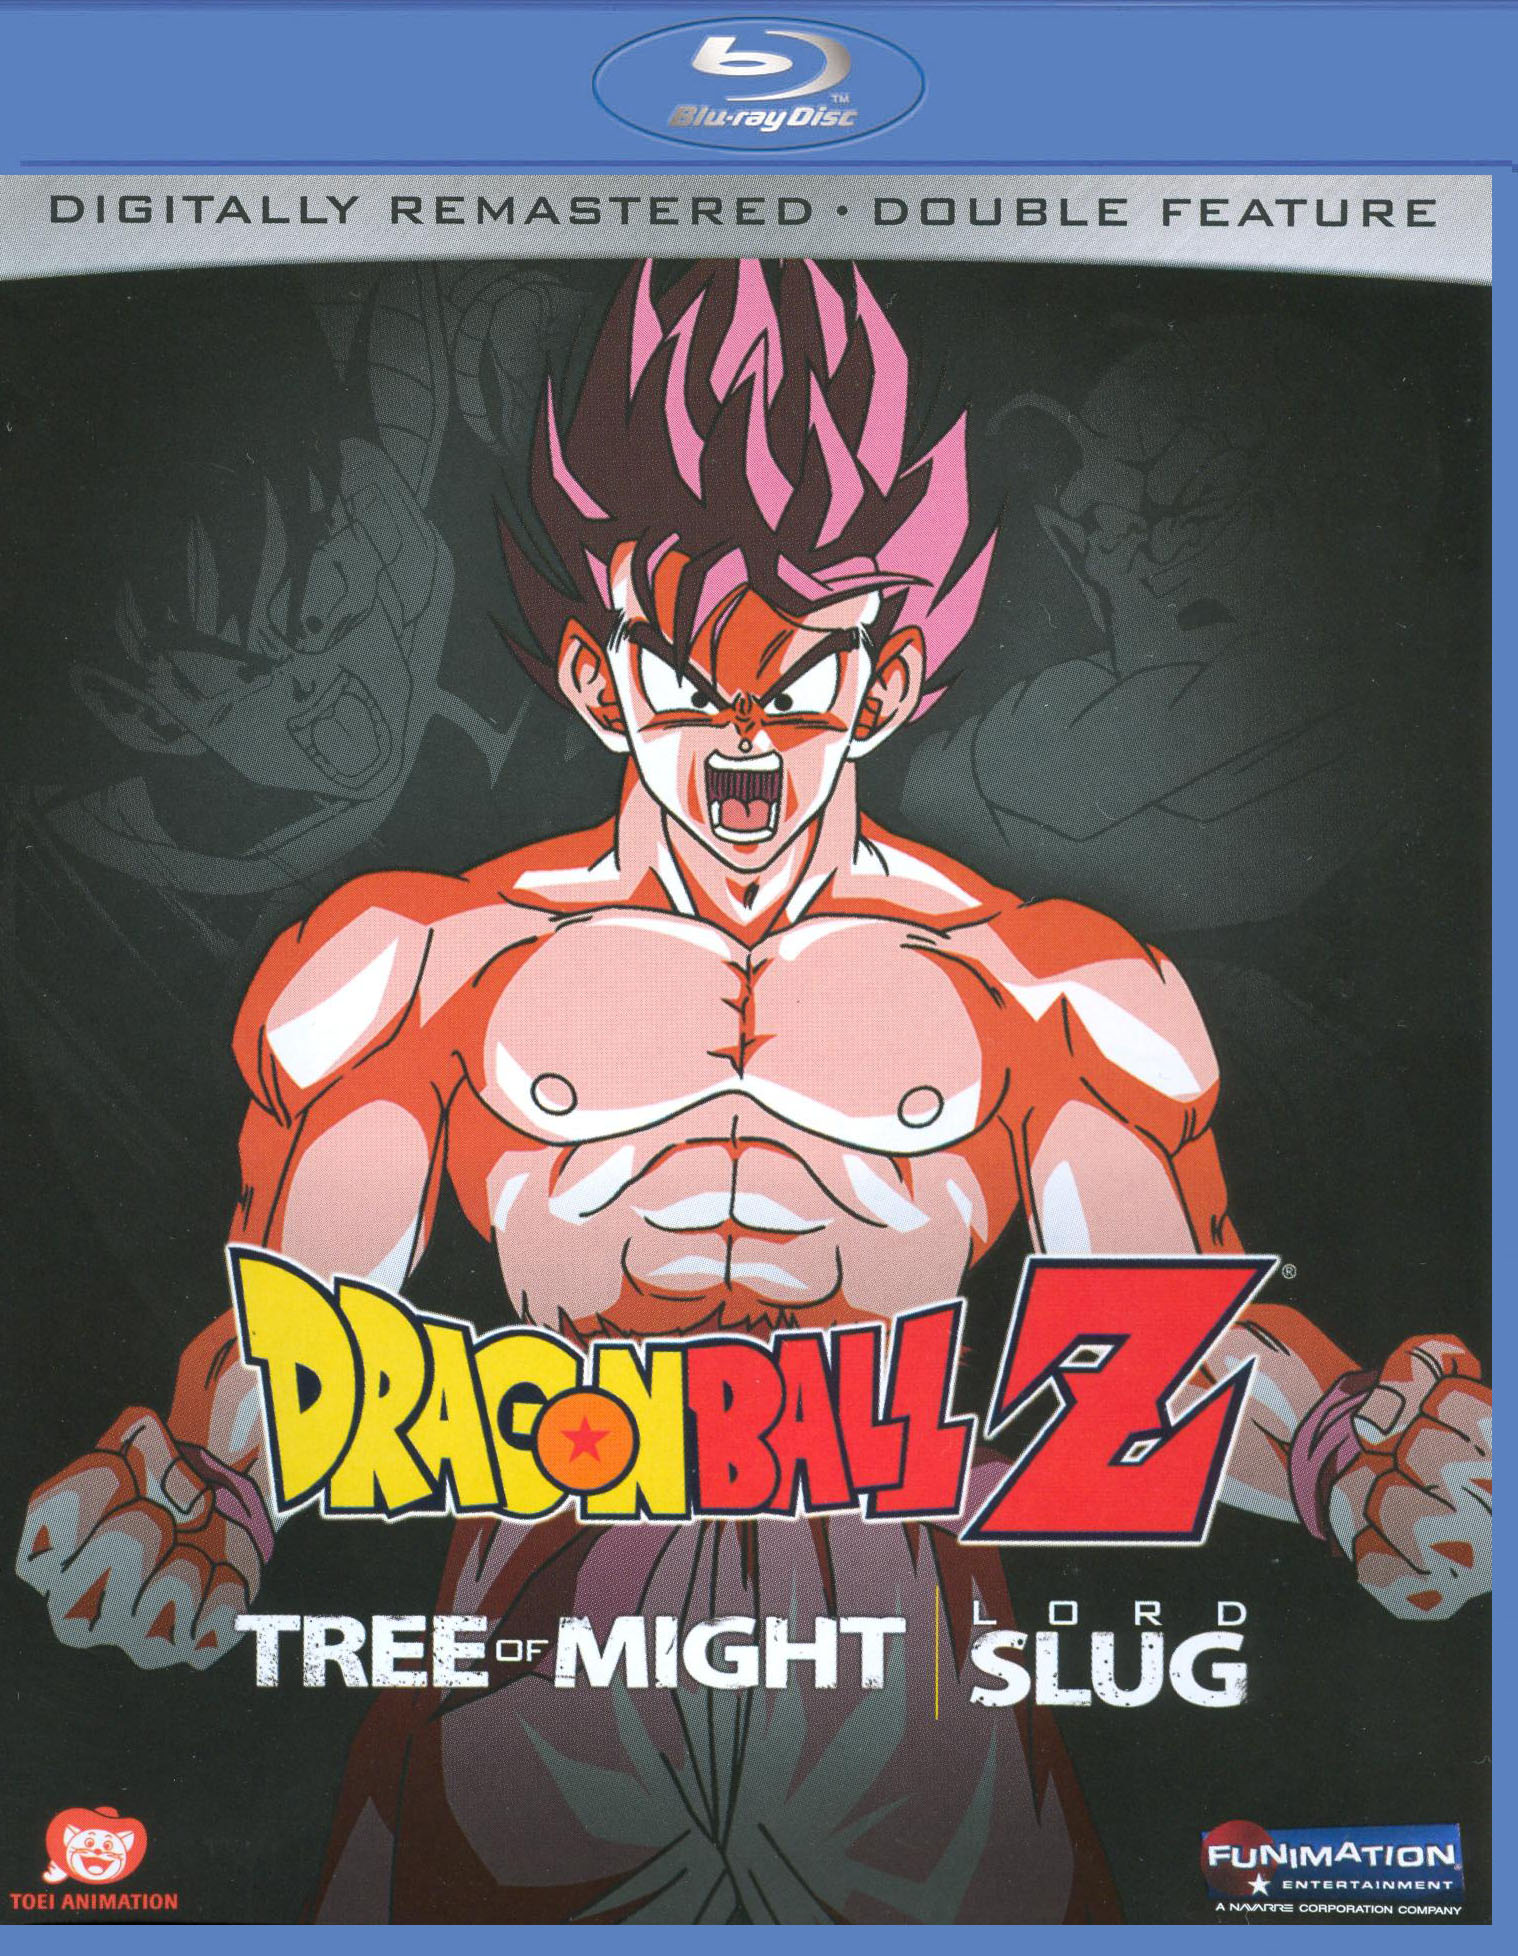 DragonBall Z: Super Android 13/Bojack Unbound [Blu-ray] - Best Buy